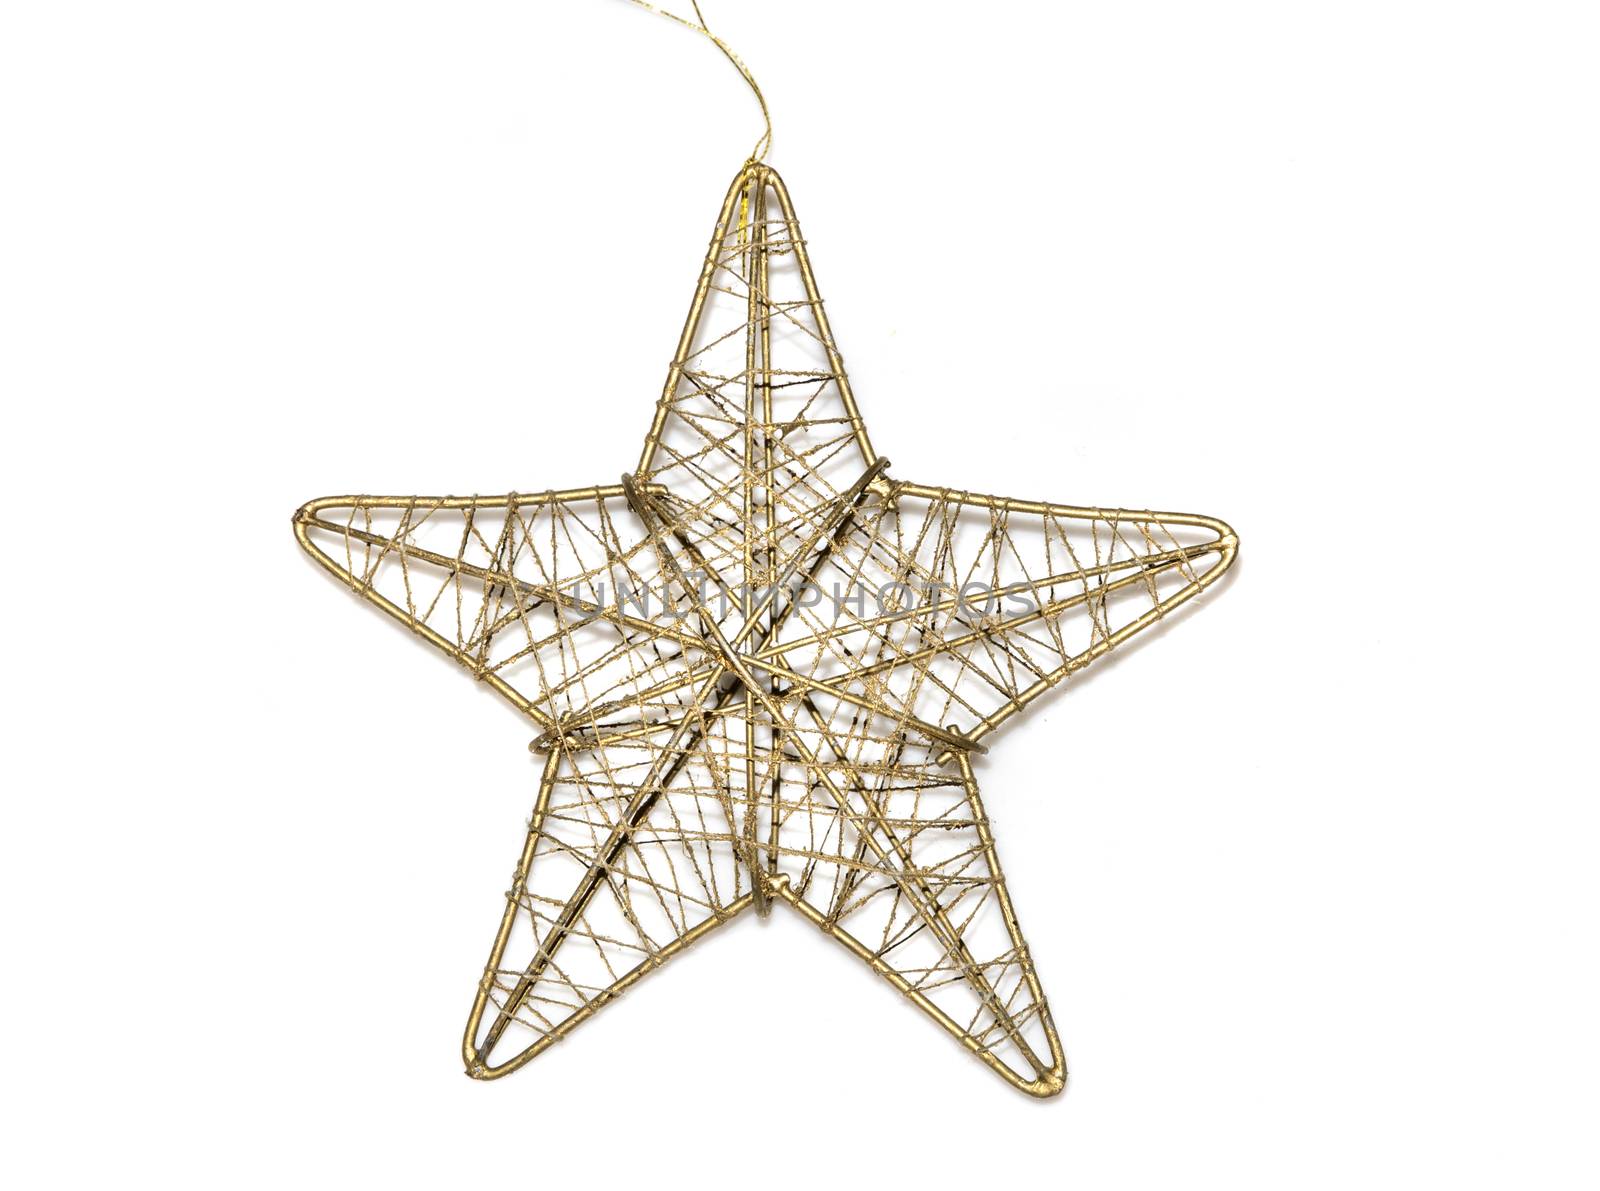 old golden christmas toy star by EdVal